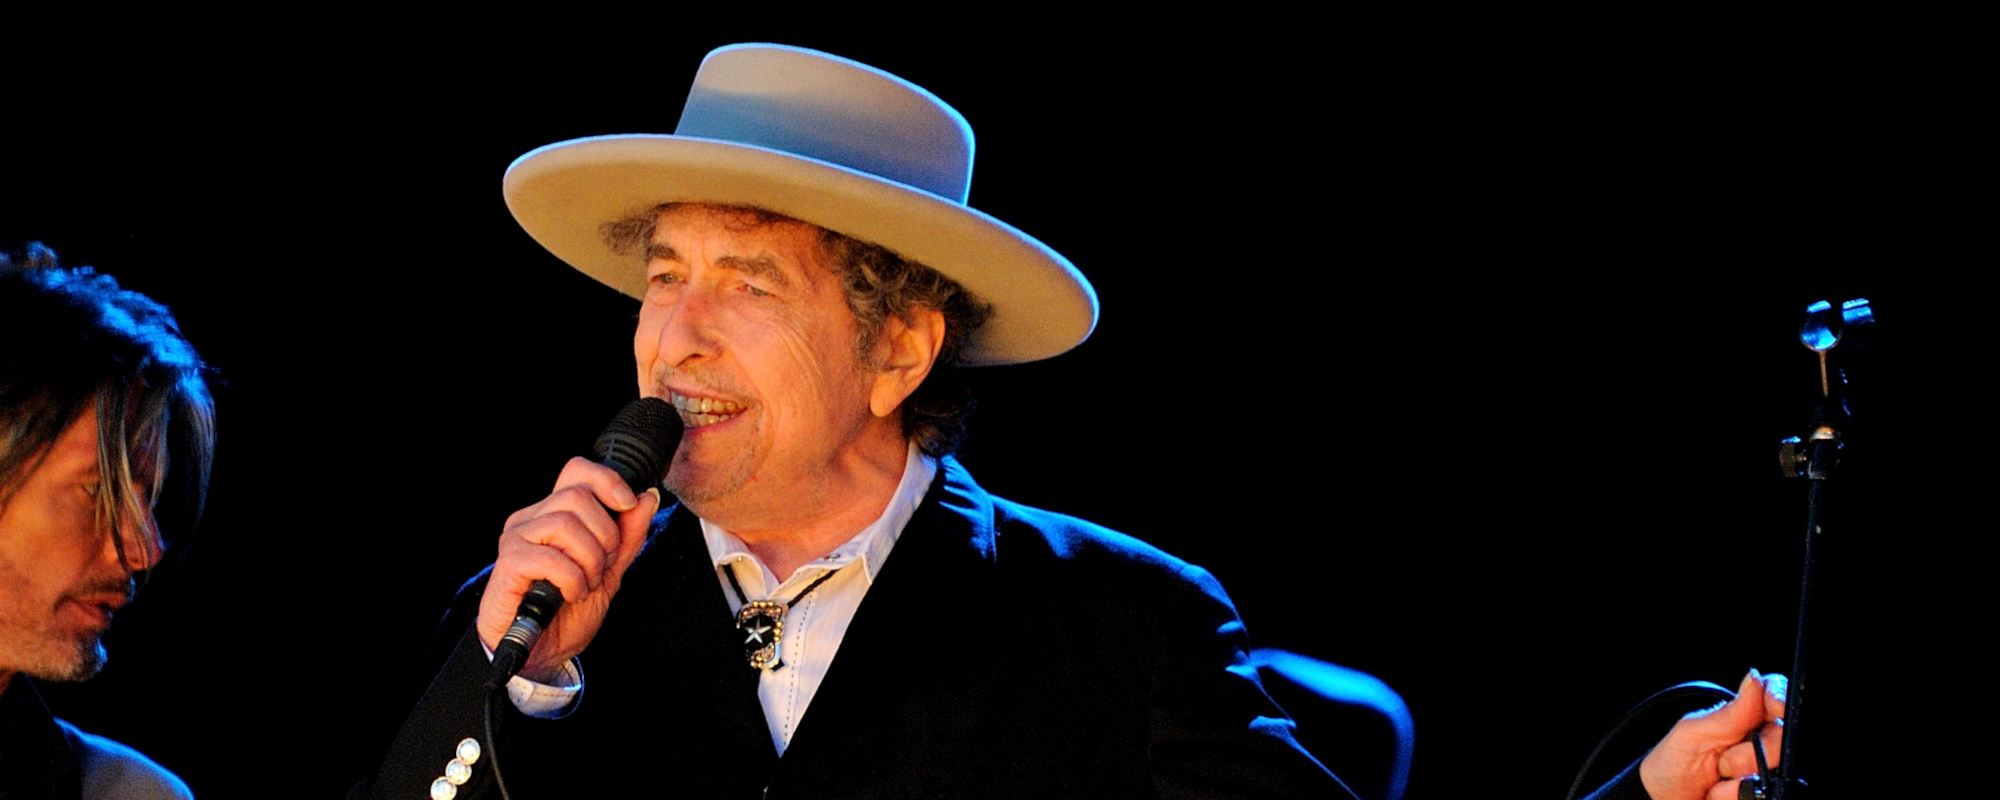 Bob Dylan’s First New Studio Recording of “Blowin’ in the Wind” Set for Auction